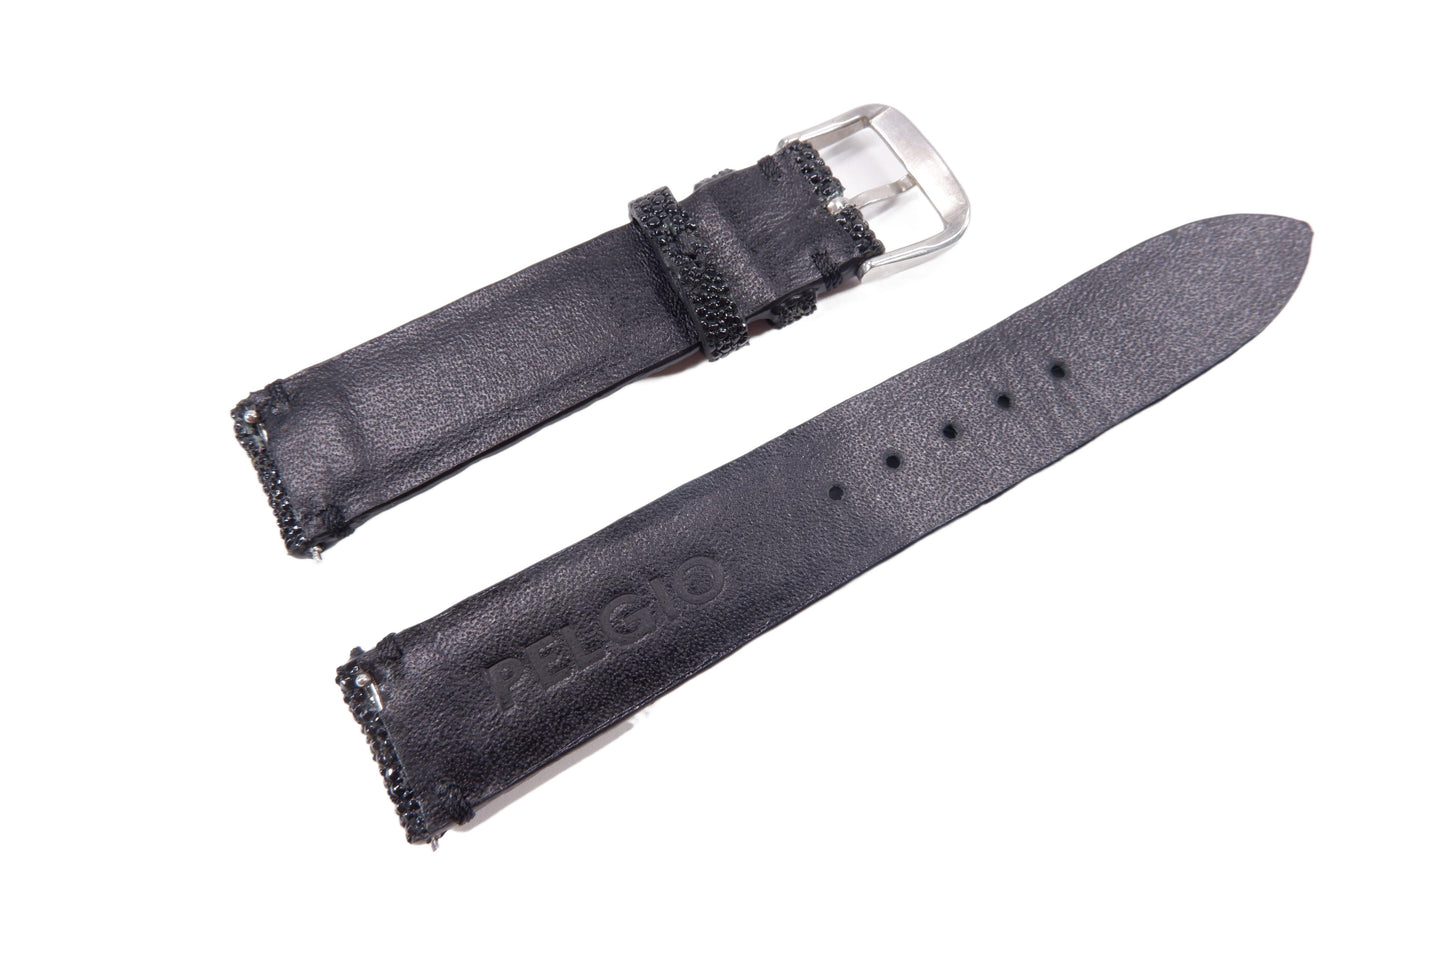 Genuine Stingray Skin Leather Quick Release Watch Strap Black Band with Buckle